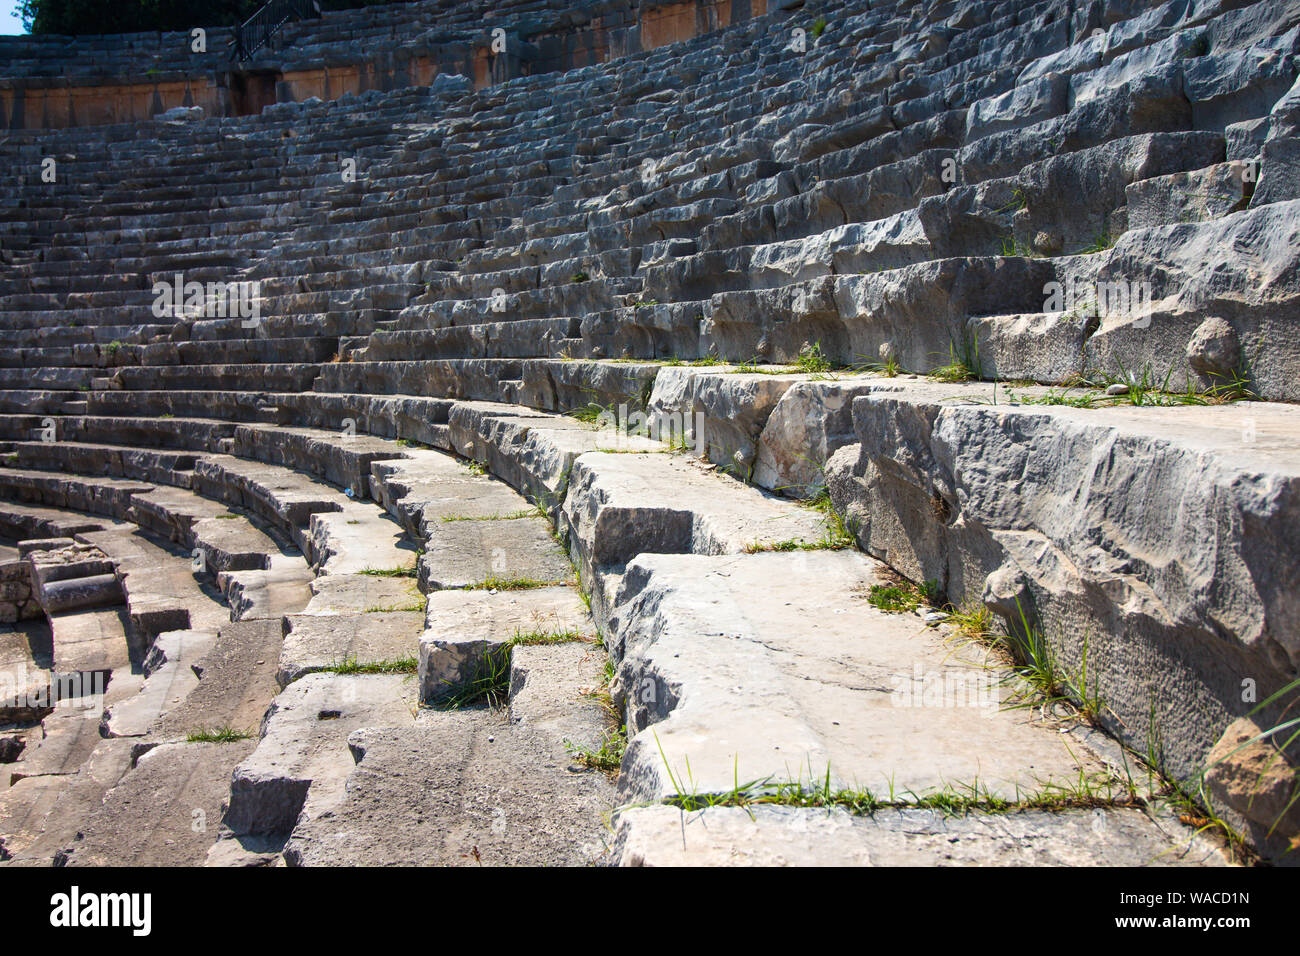 The ruins of an ancient amphitheater. The building was built by the ancient Romans in the territory of modern Turkey. Stock Photo